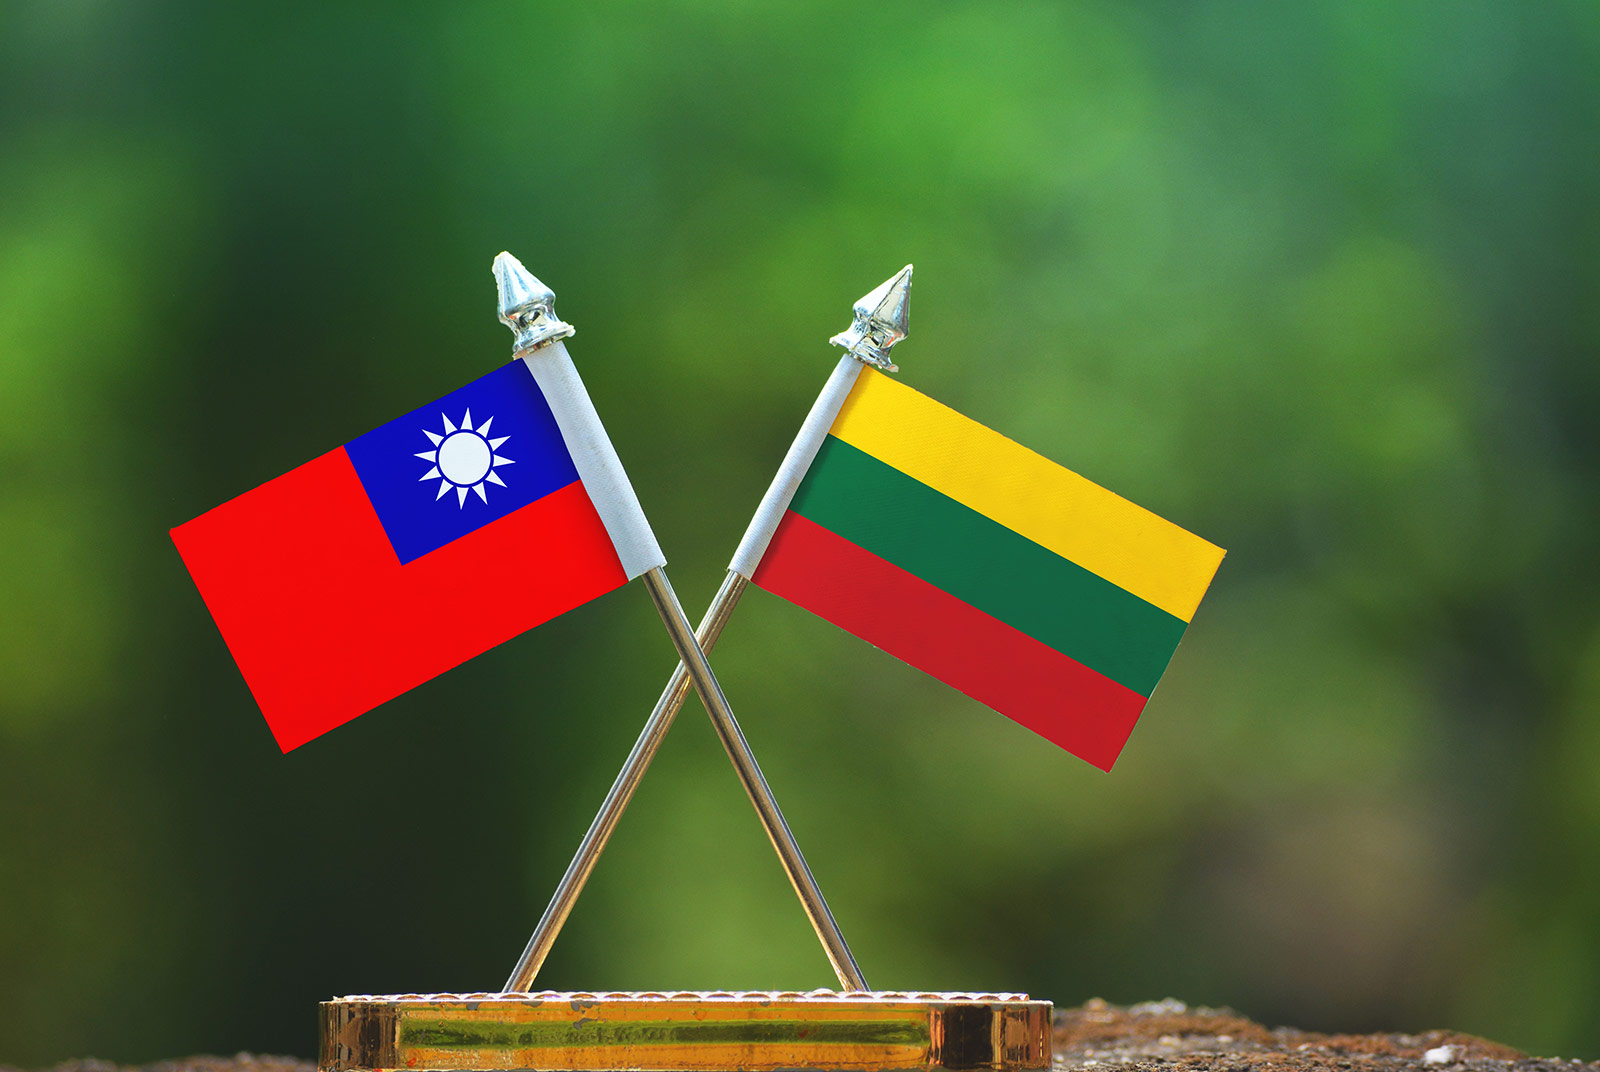 Why does Lithuania support Taiwan?